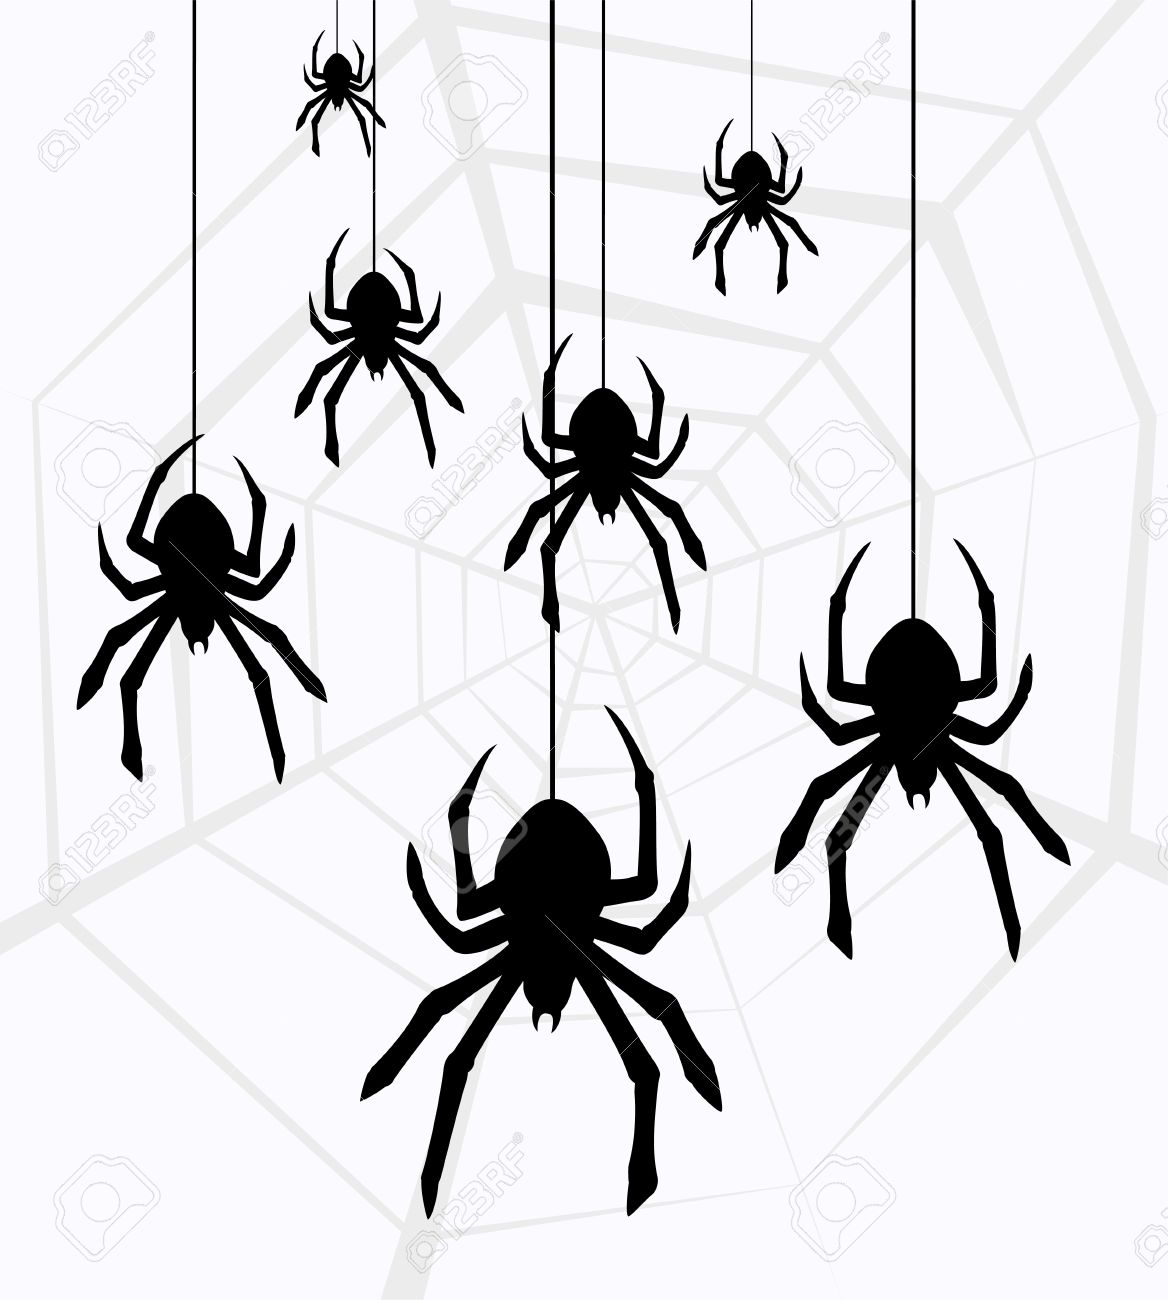 Spider pics facts funny stuff about animals clipart 